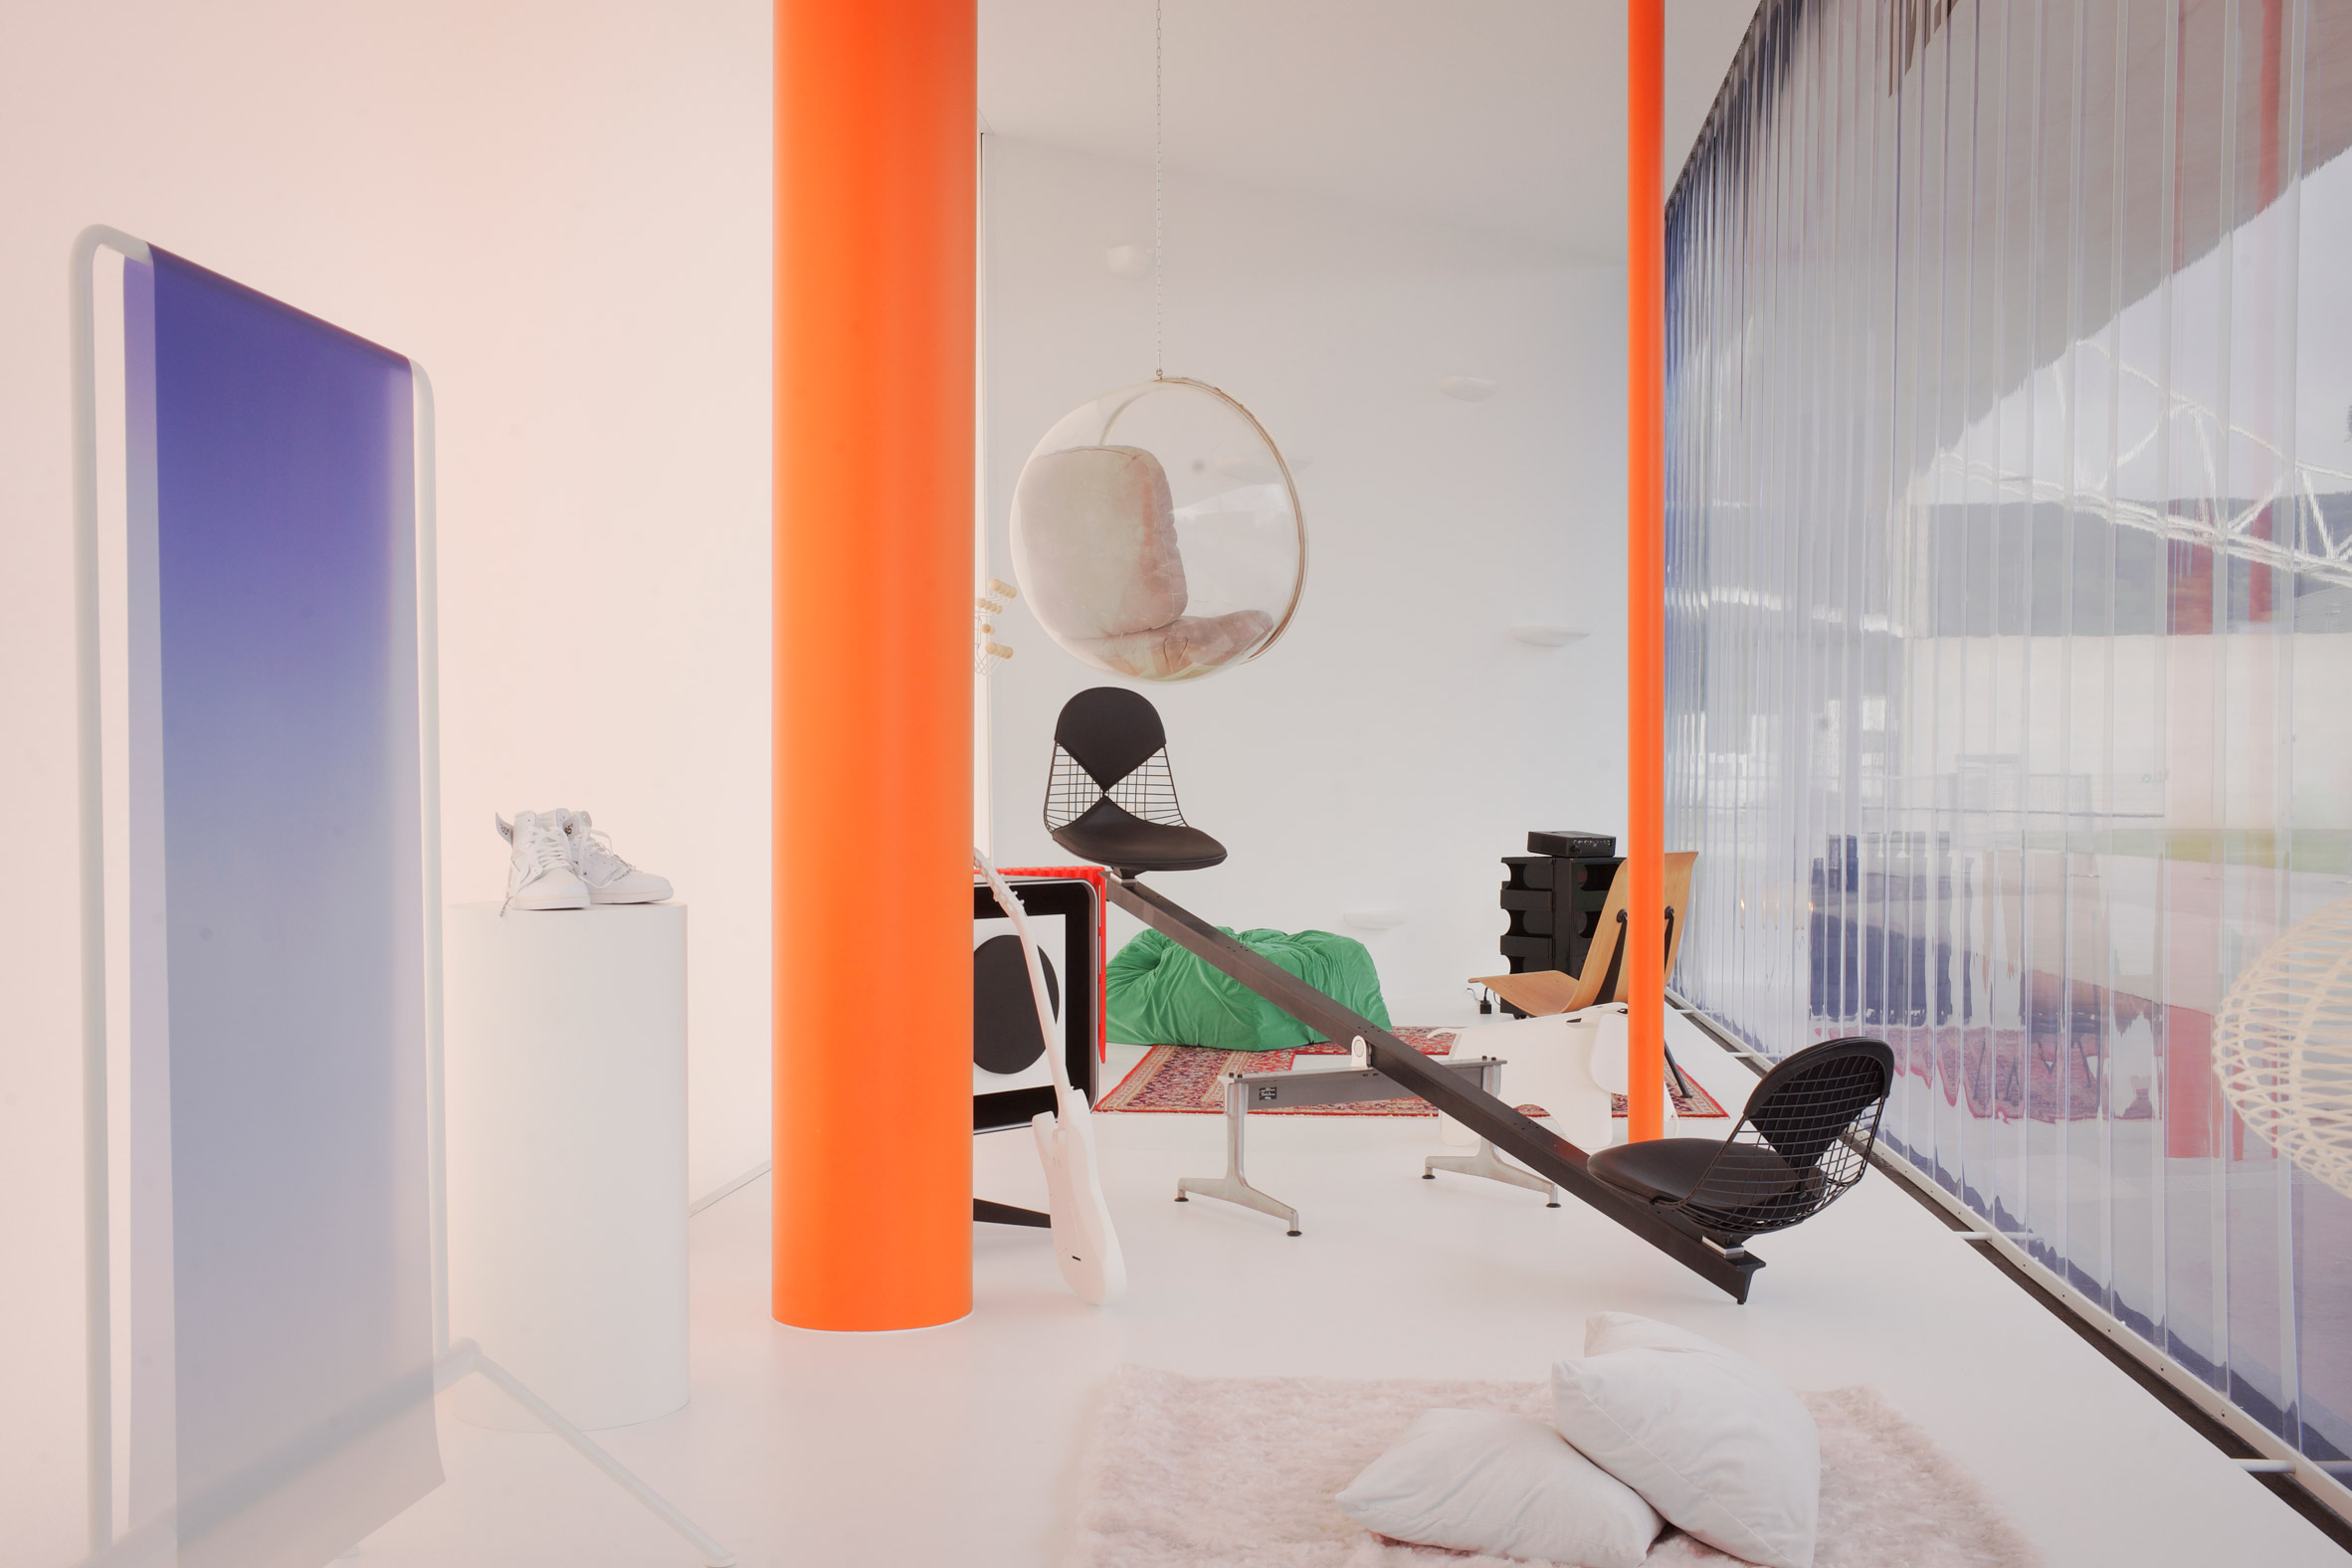 Virgil Abloh And Vitra Design Future Home Featuring Hacked